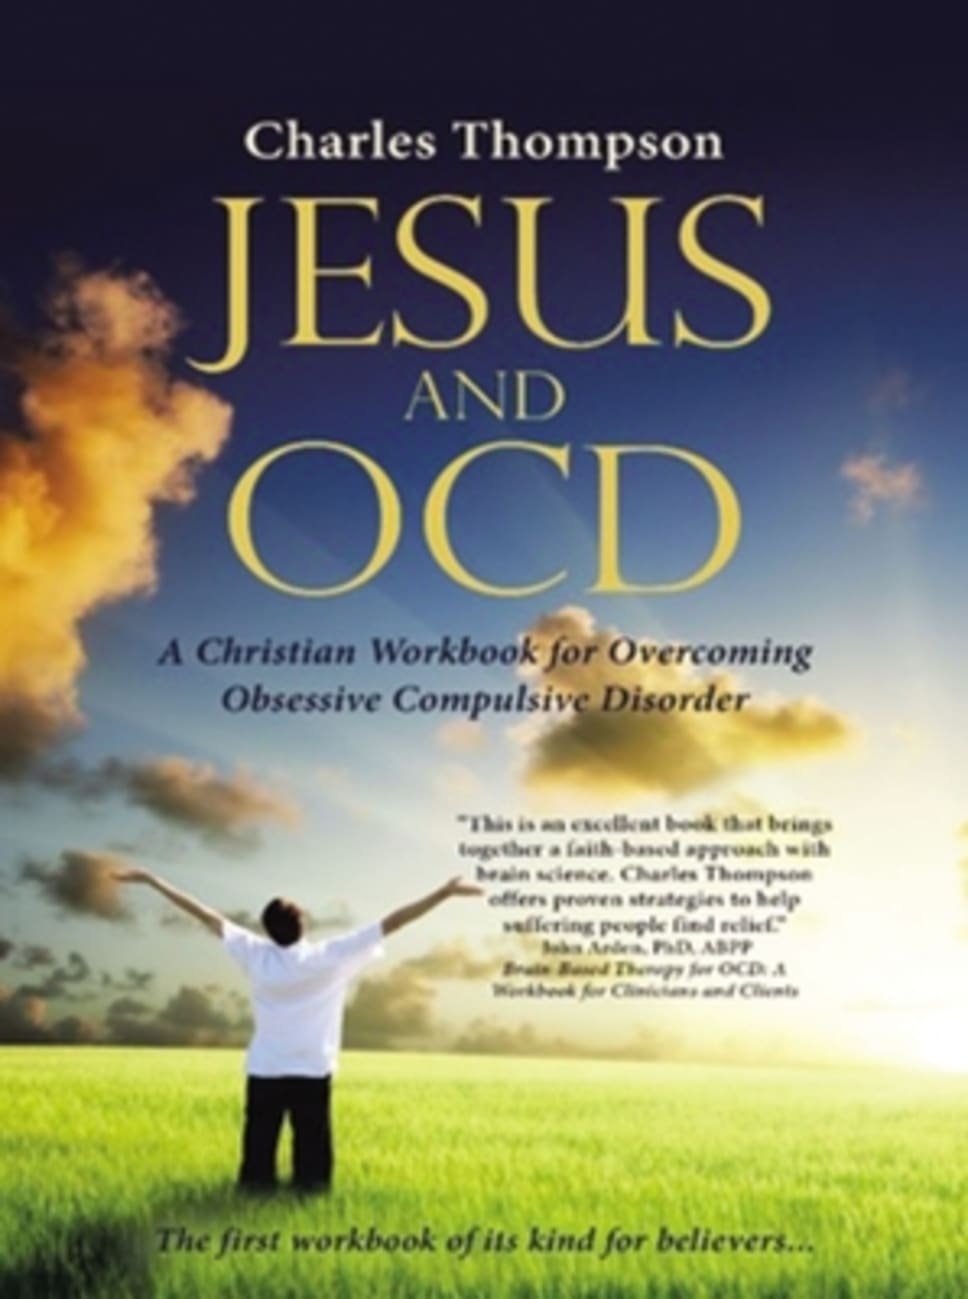 Jesus and Ocd: A Christian Workbook For Overcoming Obsessive Compulsive Disorder Paperback